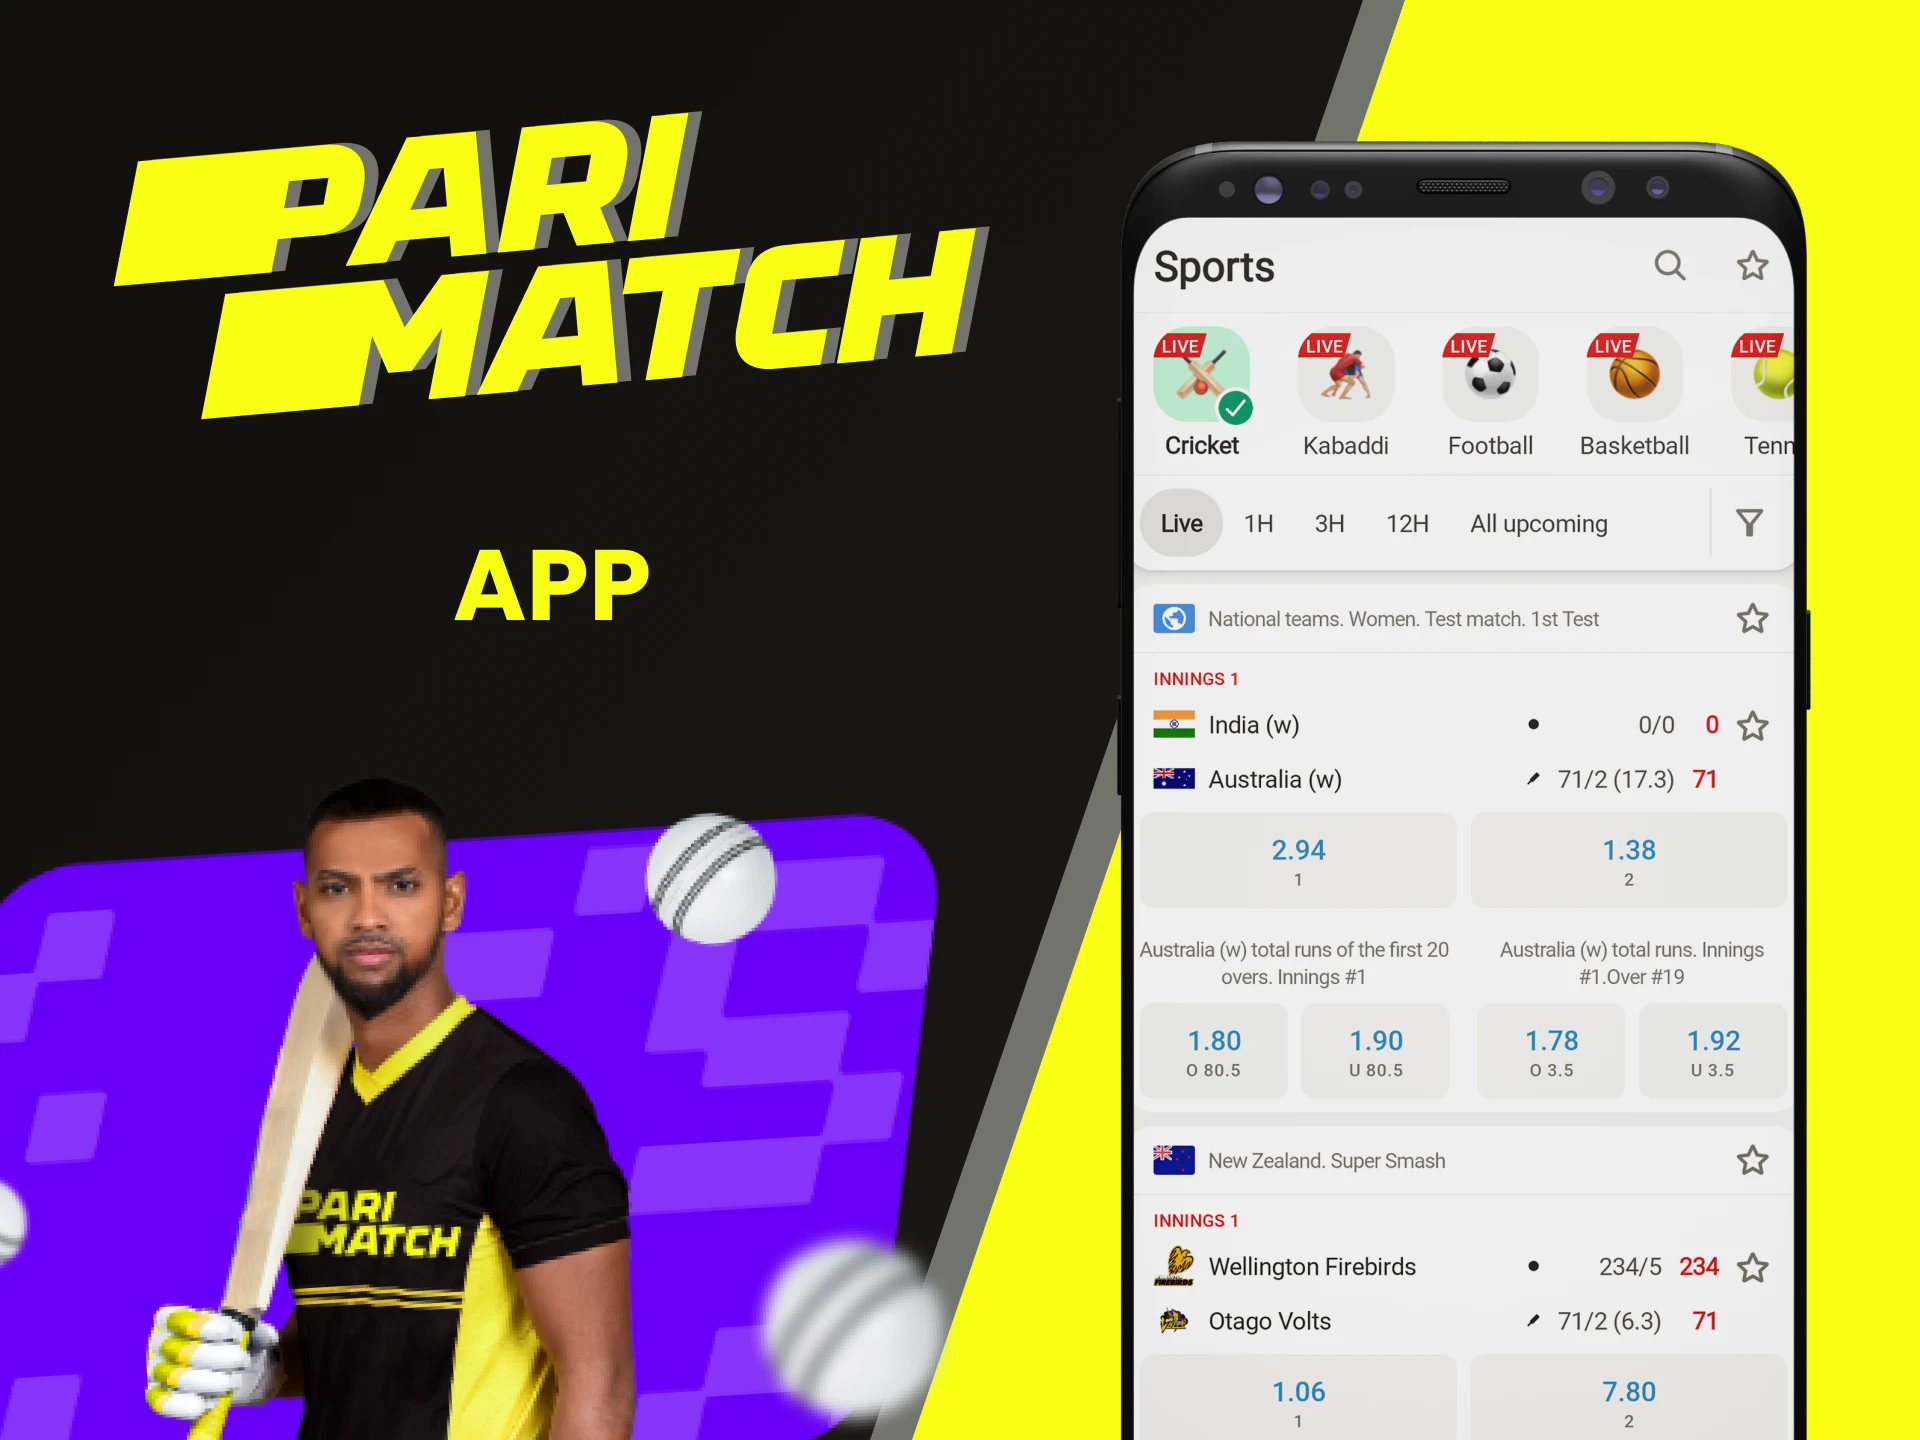 Place bets on cricket using the Parimatch app.